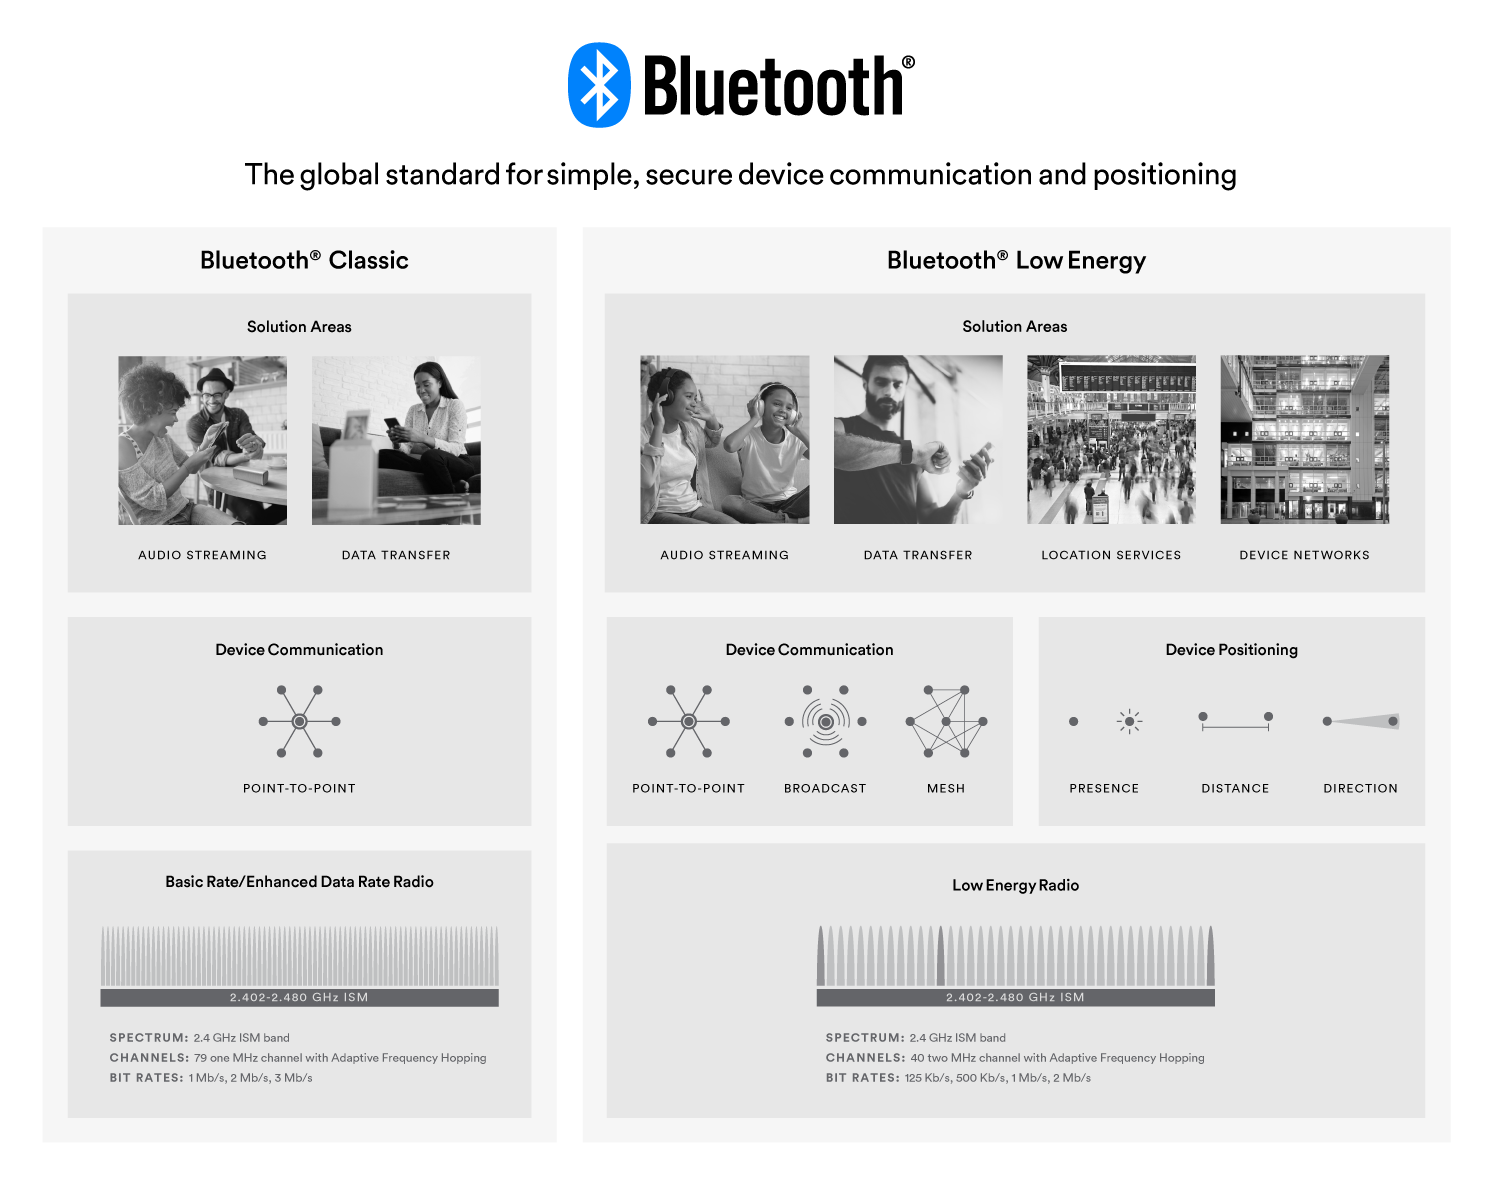 https://www.bluetooth.com/wp-content/uploads/2021/01/Bluetooth_Technology_Overview_Graphic.png